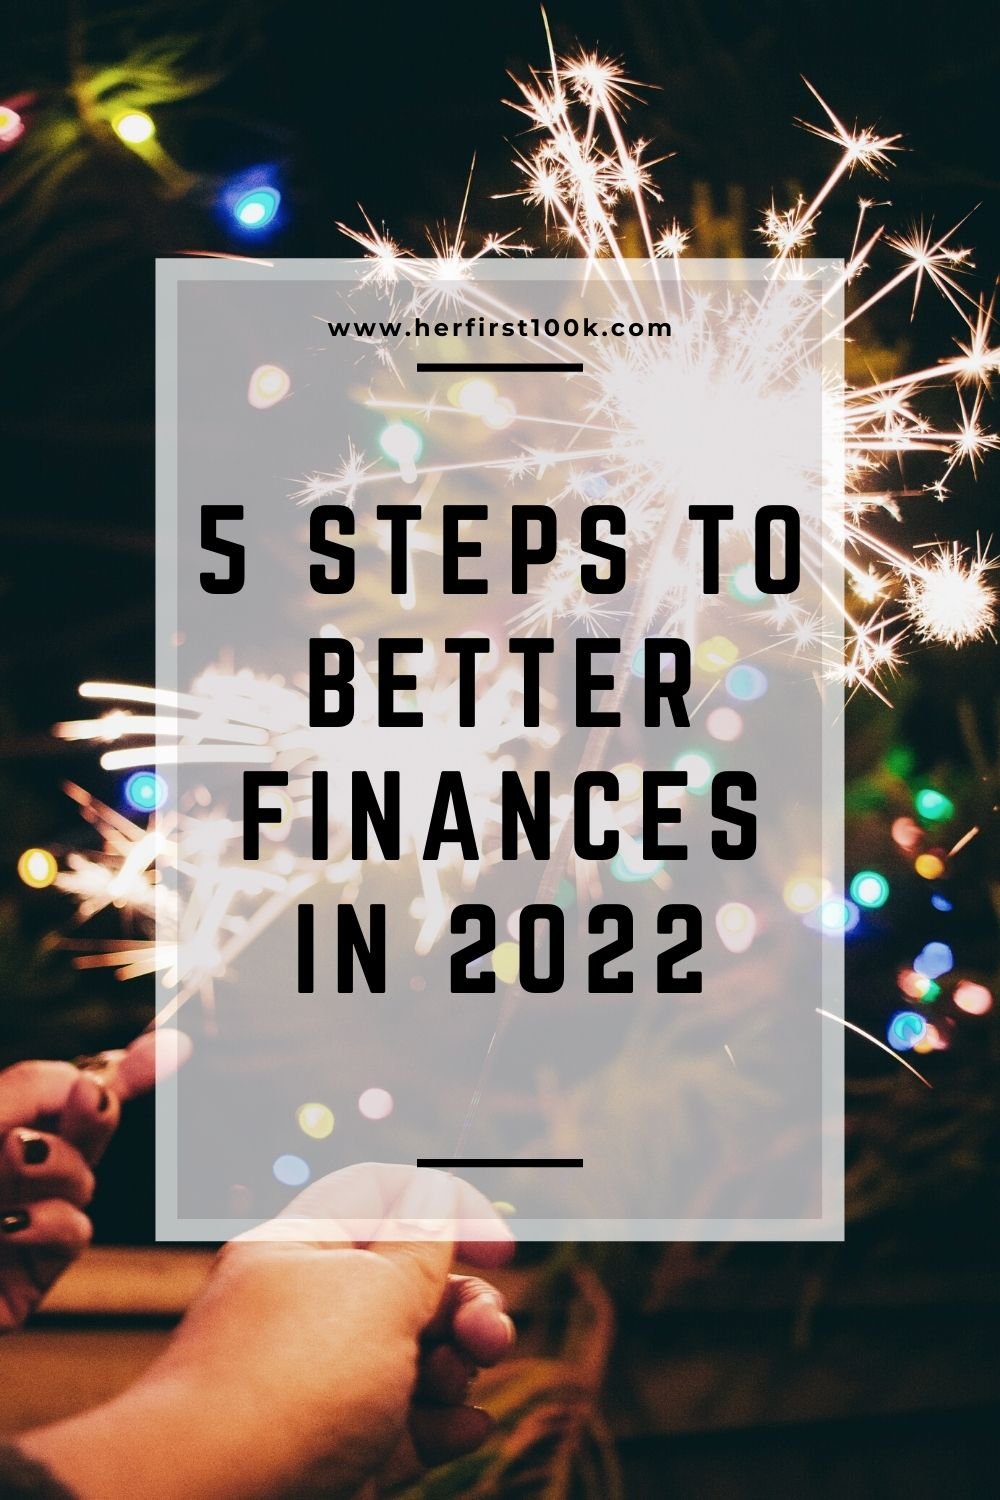 Image of person holding a sparkler with fireworks in the background with text overlay "5 Steps to Better Finances in 2022"